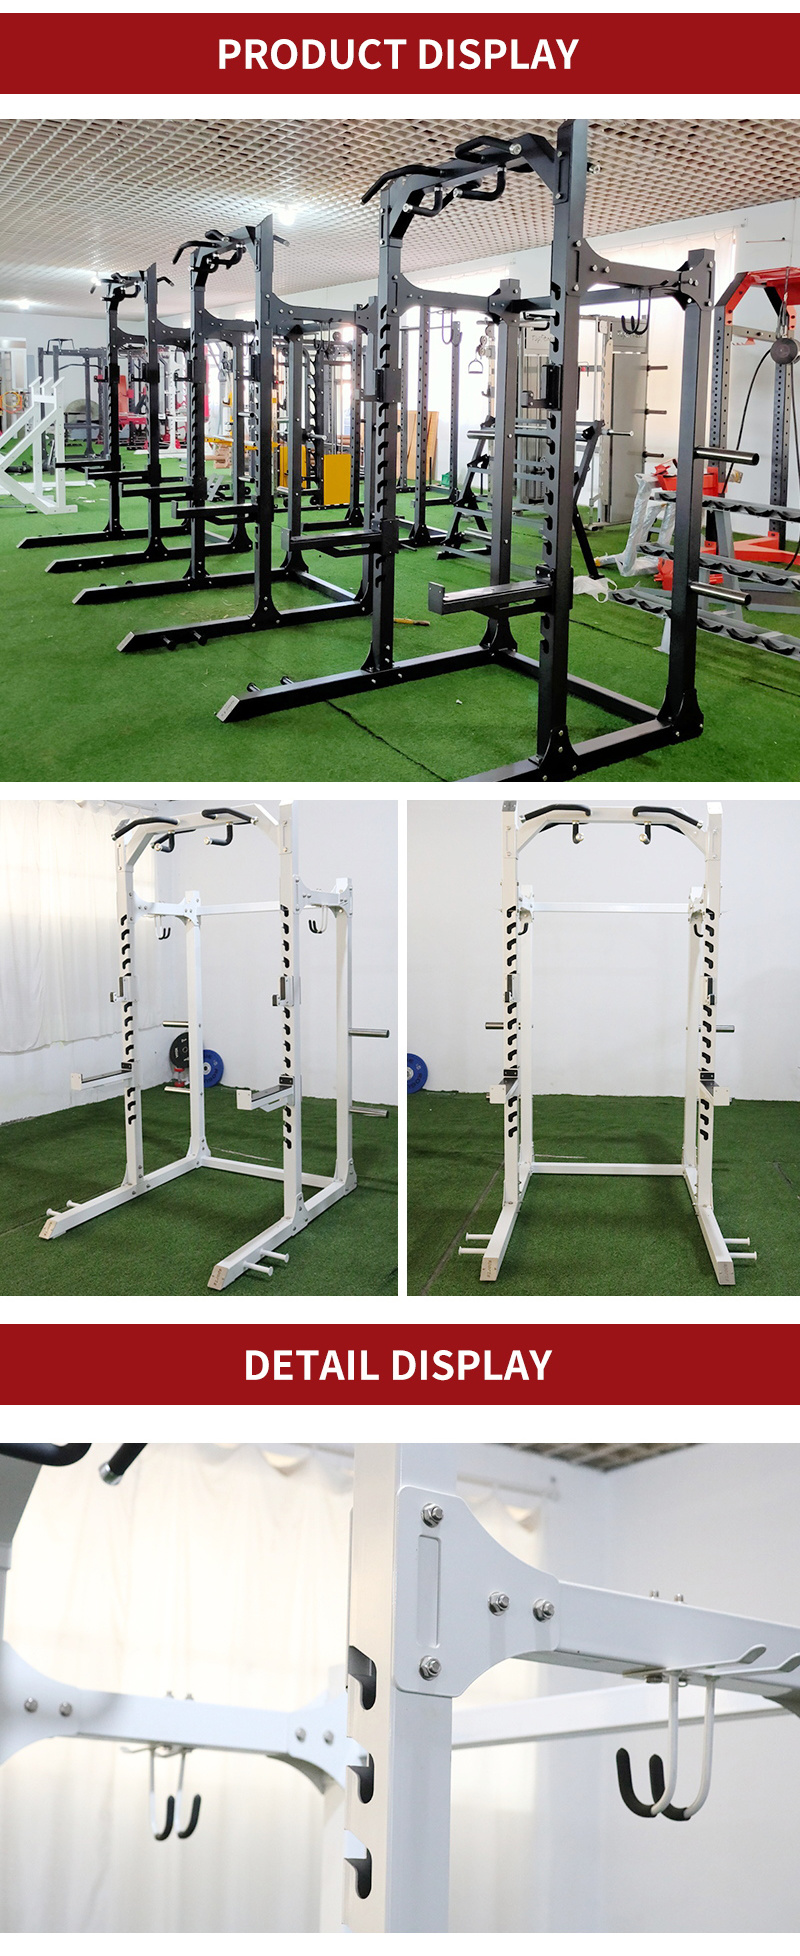 Professional Wall Mount Squat Foldable Cross Fit Home Gym Equipment Multi Power Rack Cage